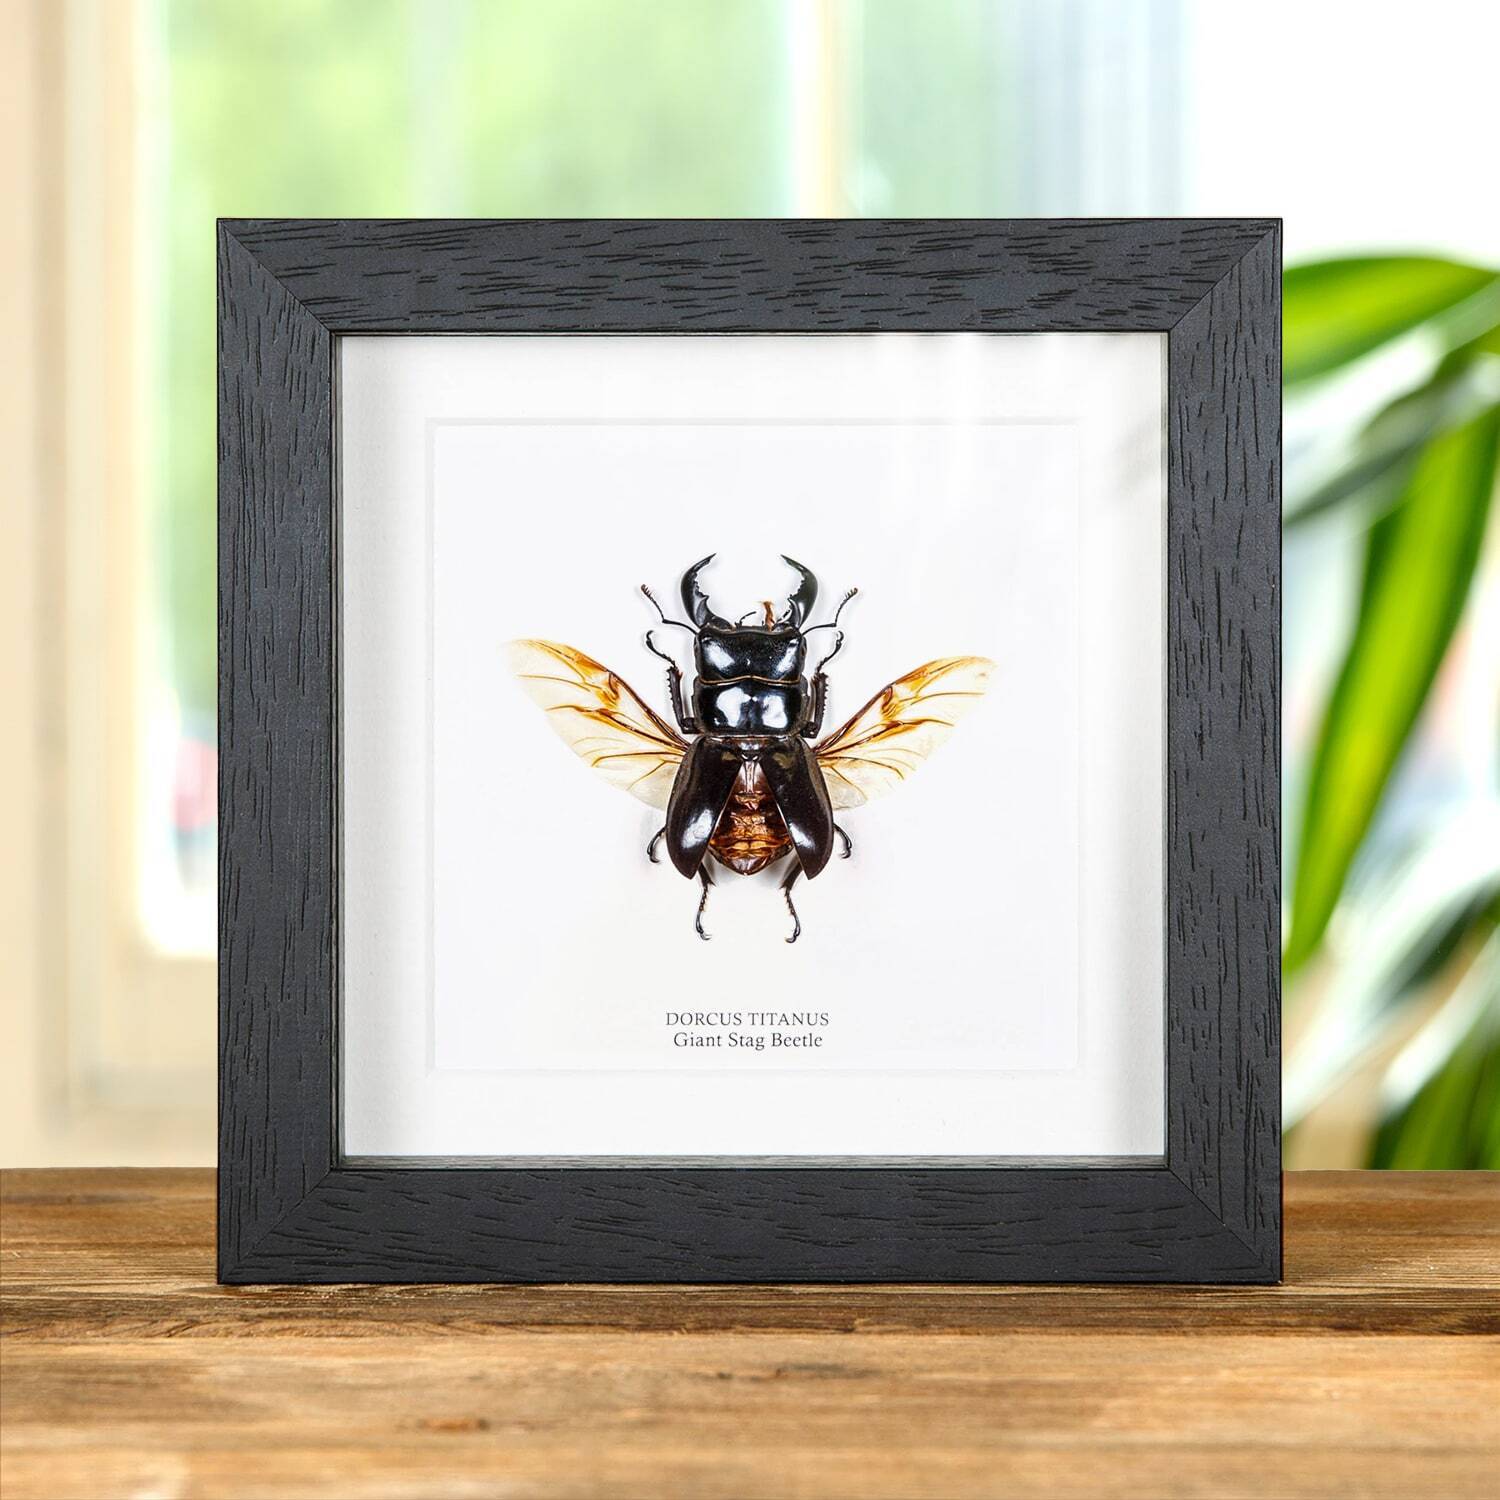 Wing-spread Giant Stag Taxidermy Beetle Frame (Dorcus titanus)